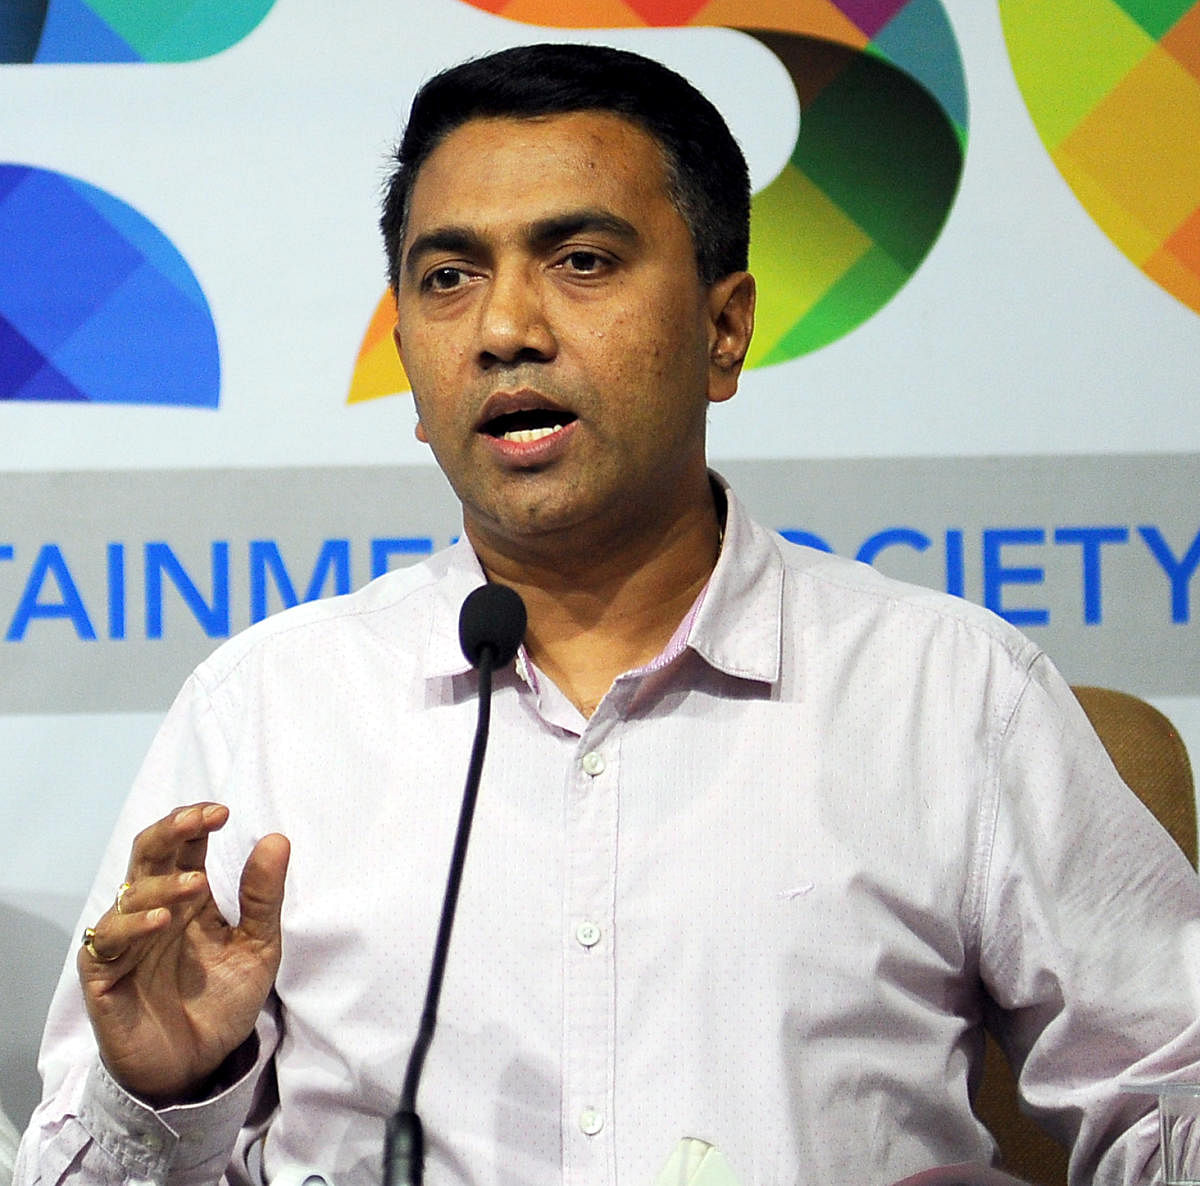 Asymptomatic Covid-19 patients can now home quarantine themselves: Goa CM Pramod Sawant